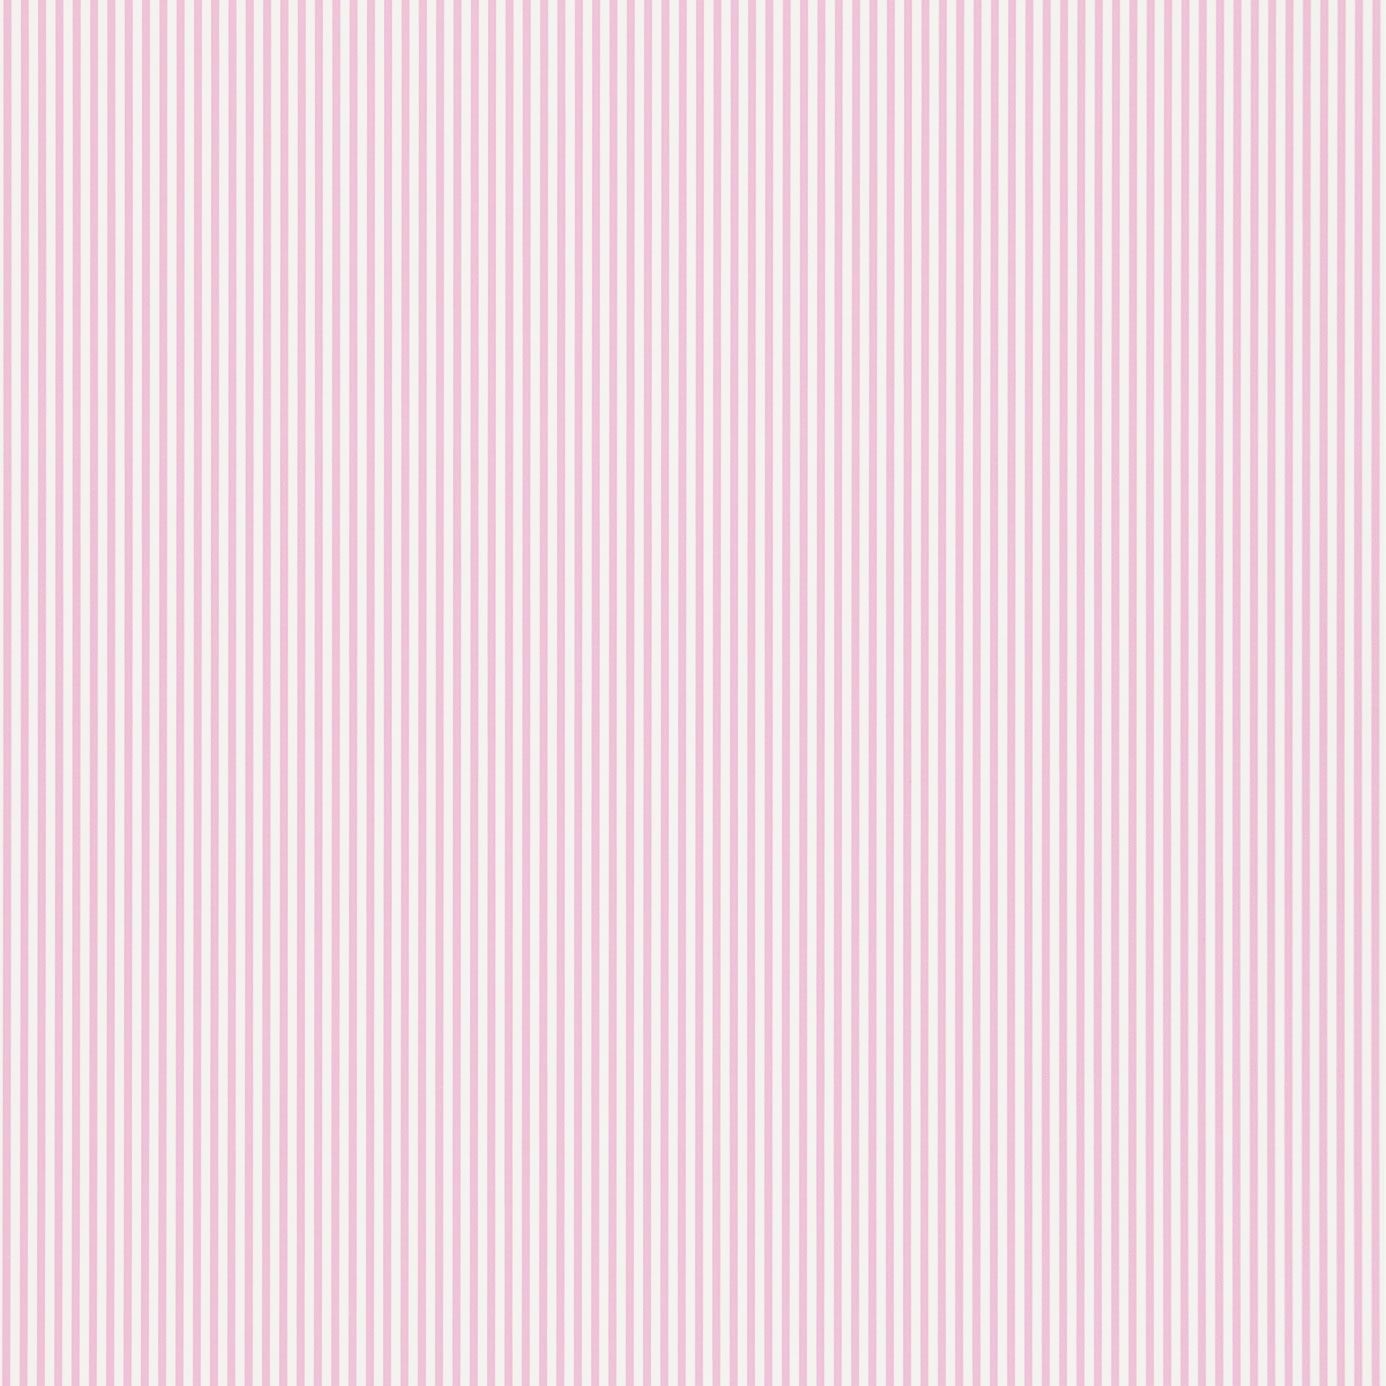 Pink And White Stripe Wallpaper - Widescreen HD Backgrounds